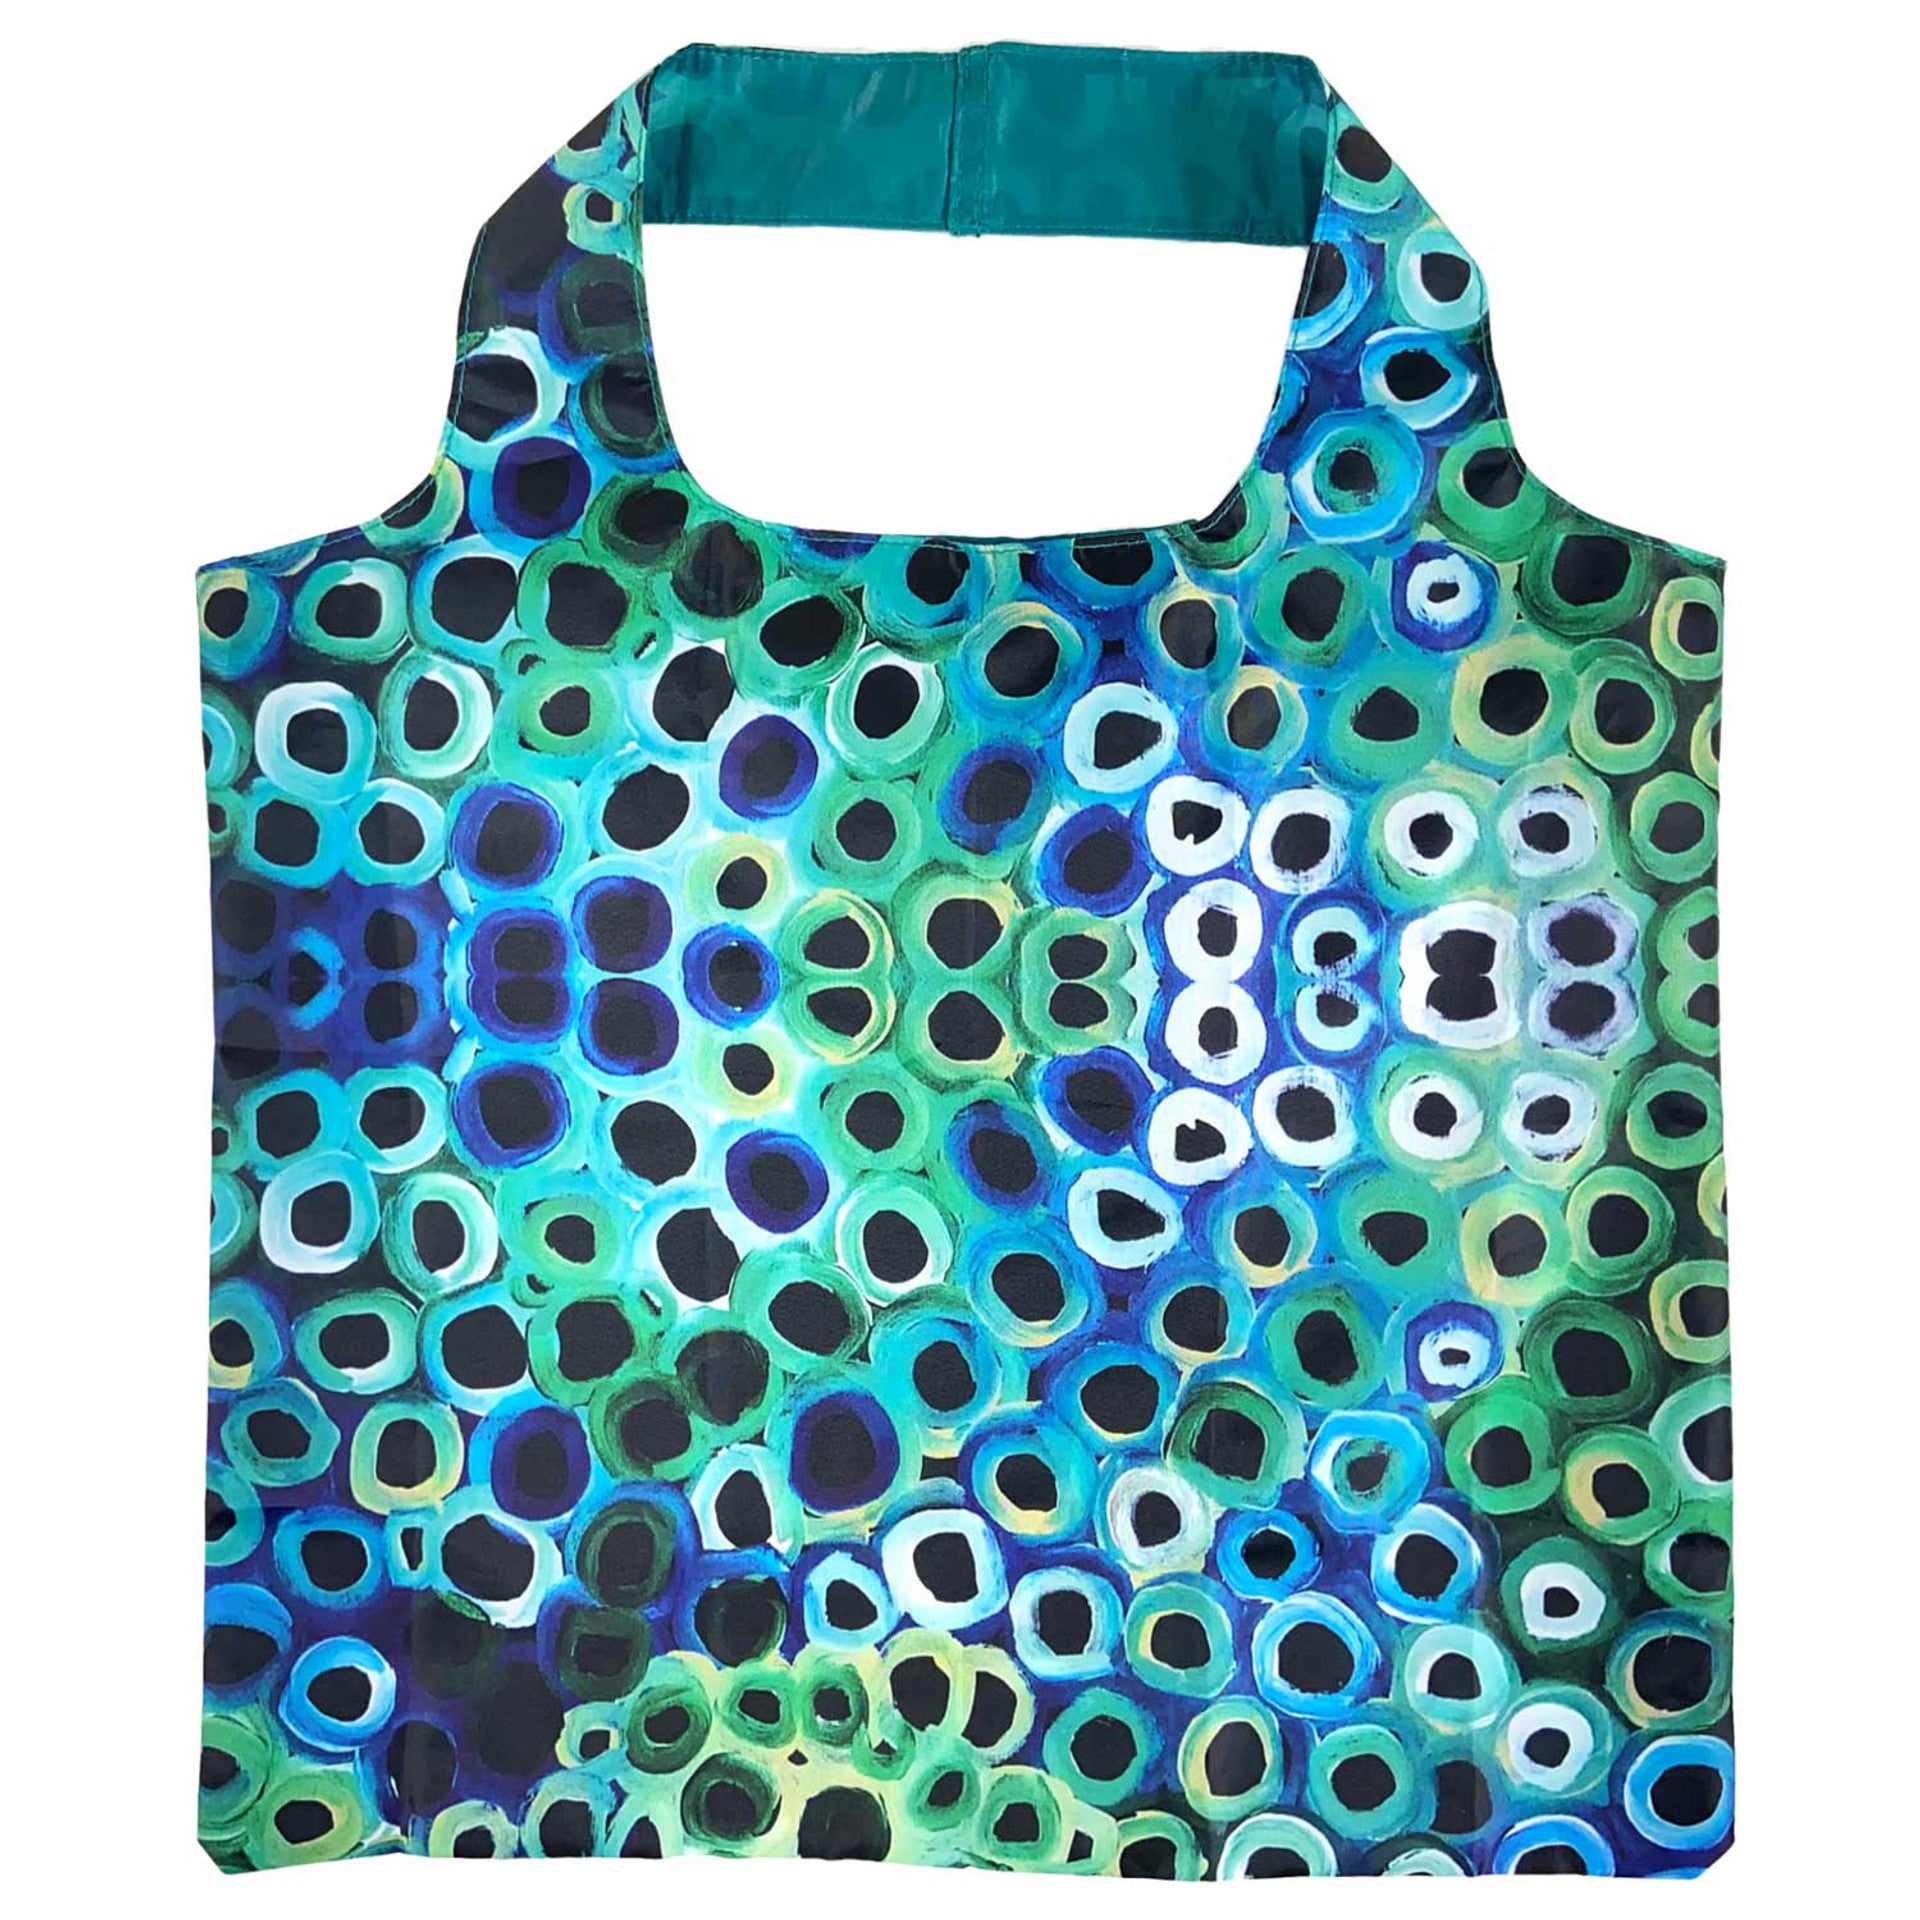 Foldable Shopping Bag (Recycled) - Lena Pwerle - Green